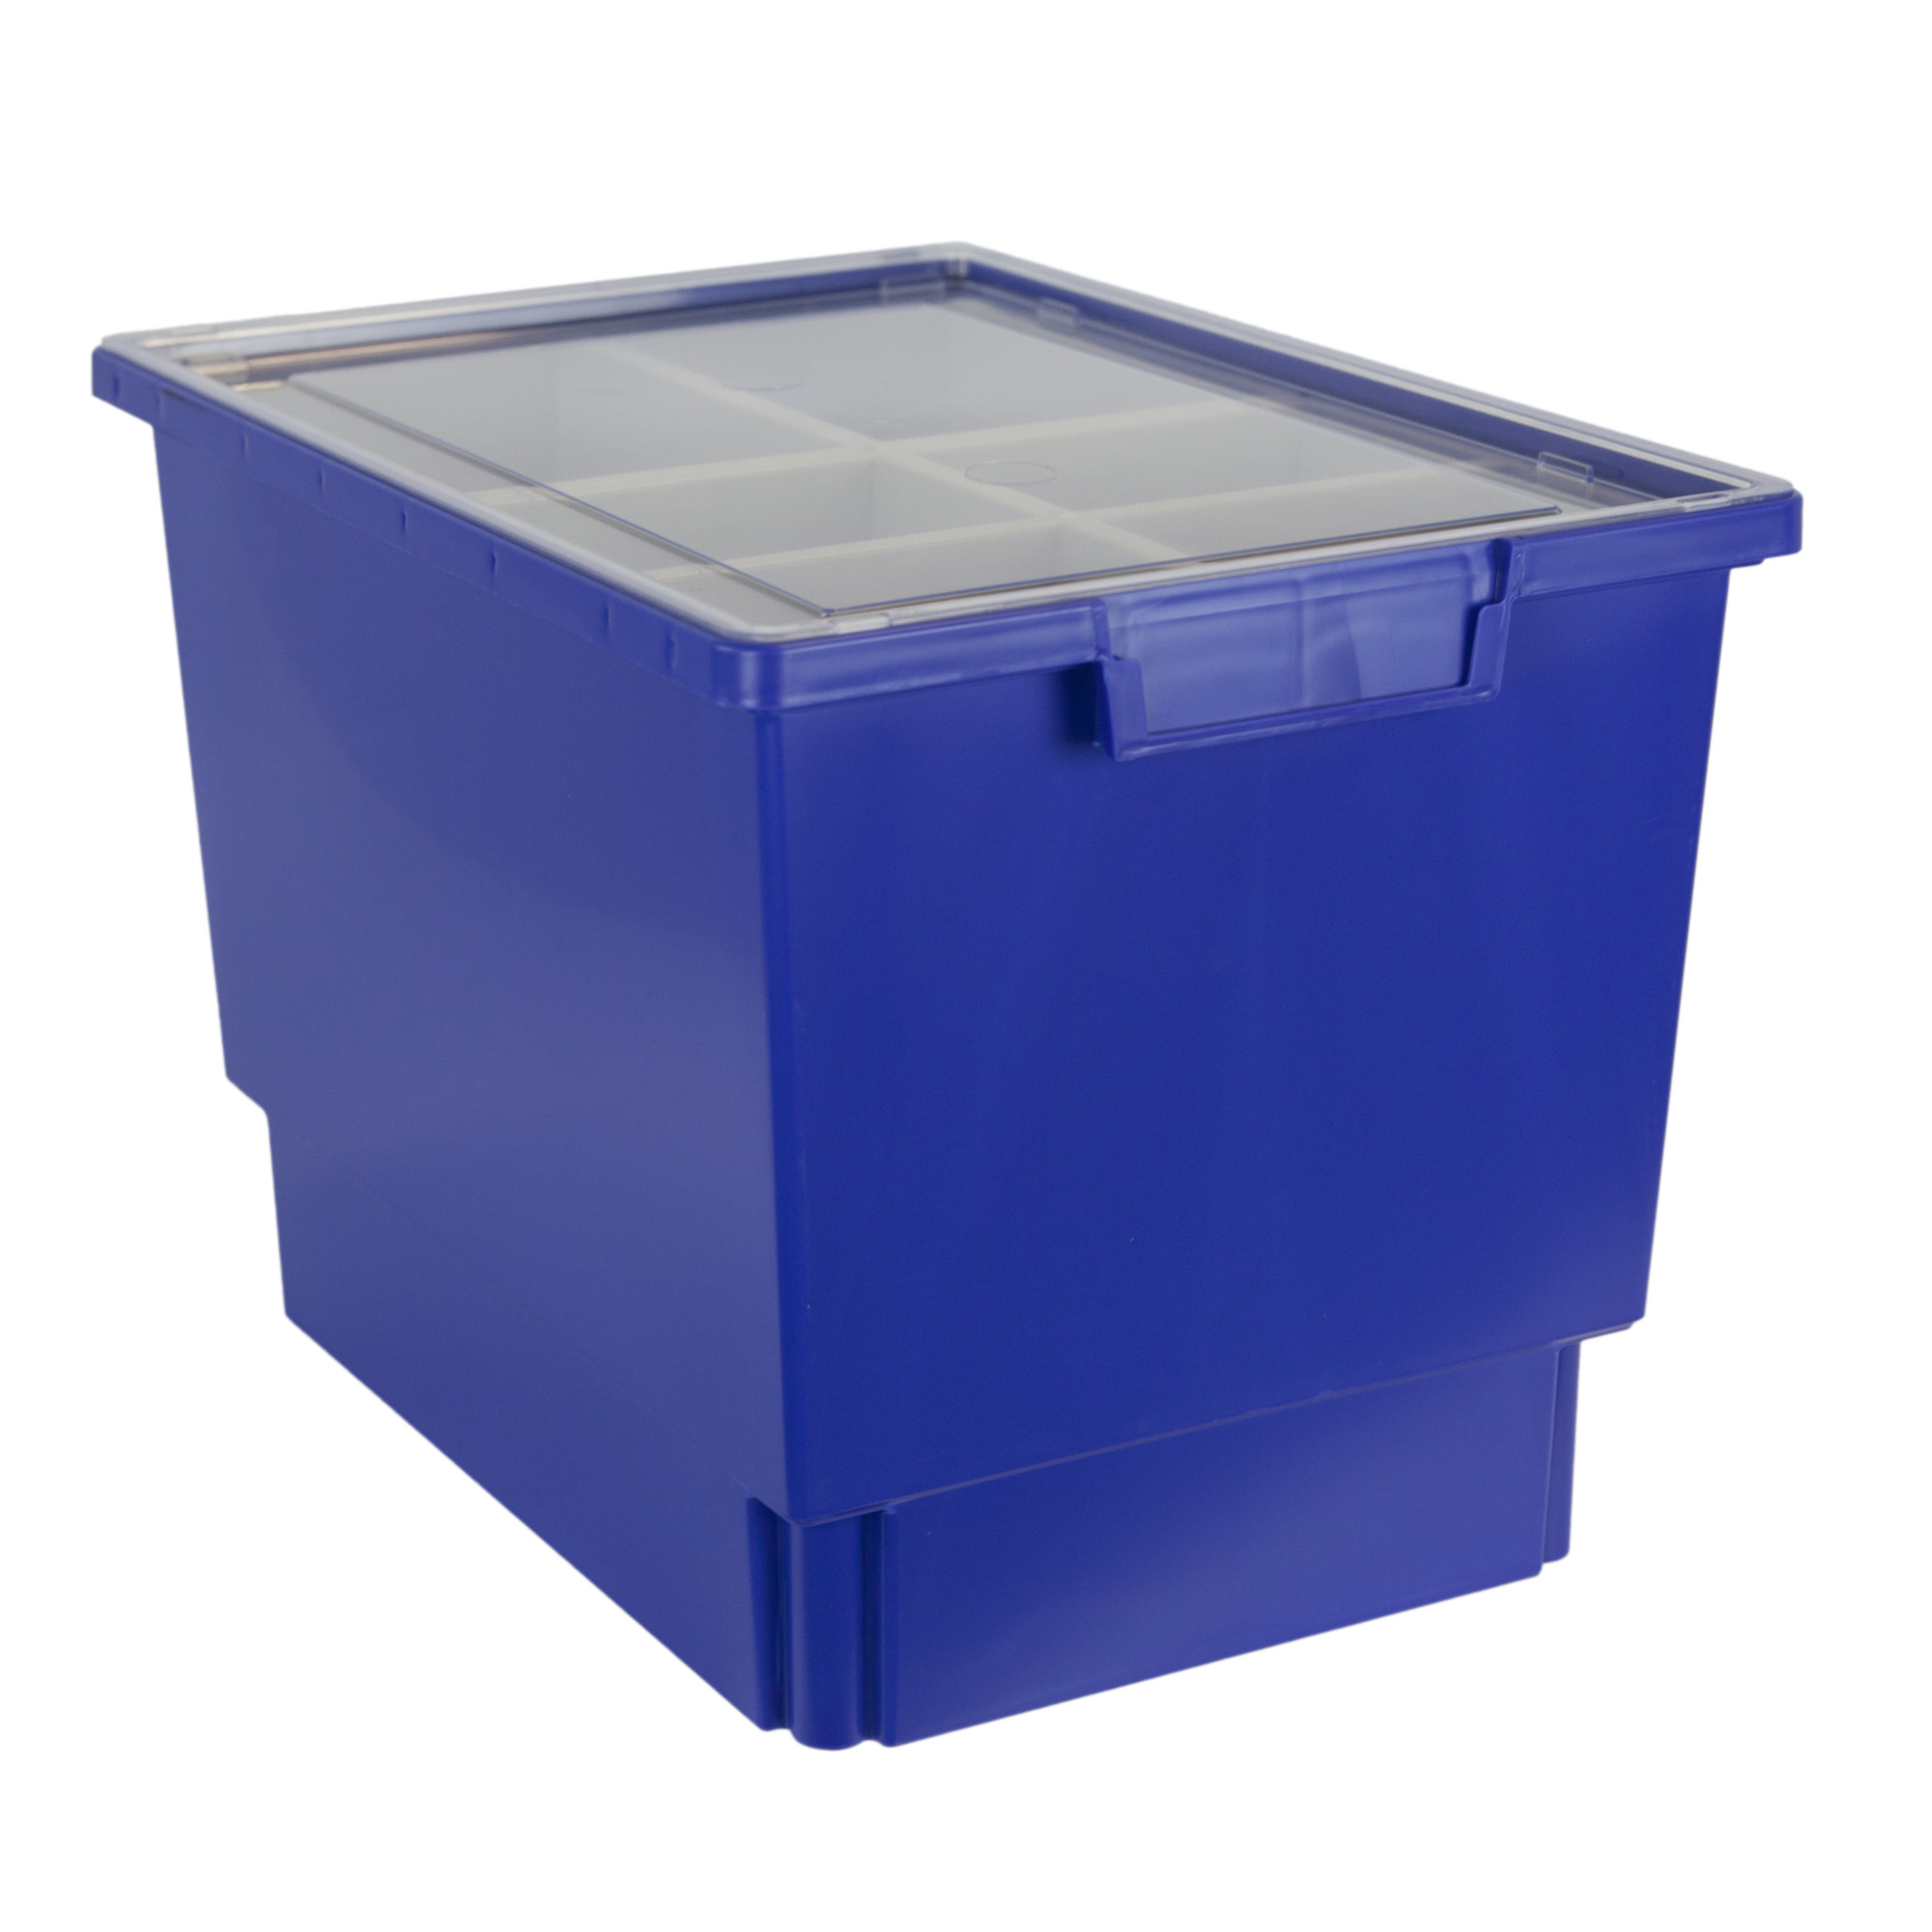 Certwood StorWerks, Slim Line 12Inch Tray Kit (6 x Divisions) Blue-3PK, Included (qty.) 3, Material Plastic, Height 12 in, Model CE1954PB-NK0300-3